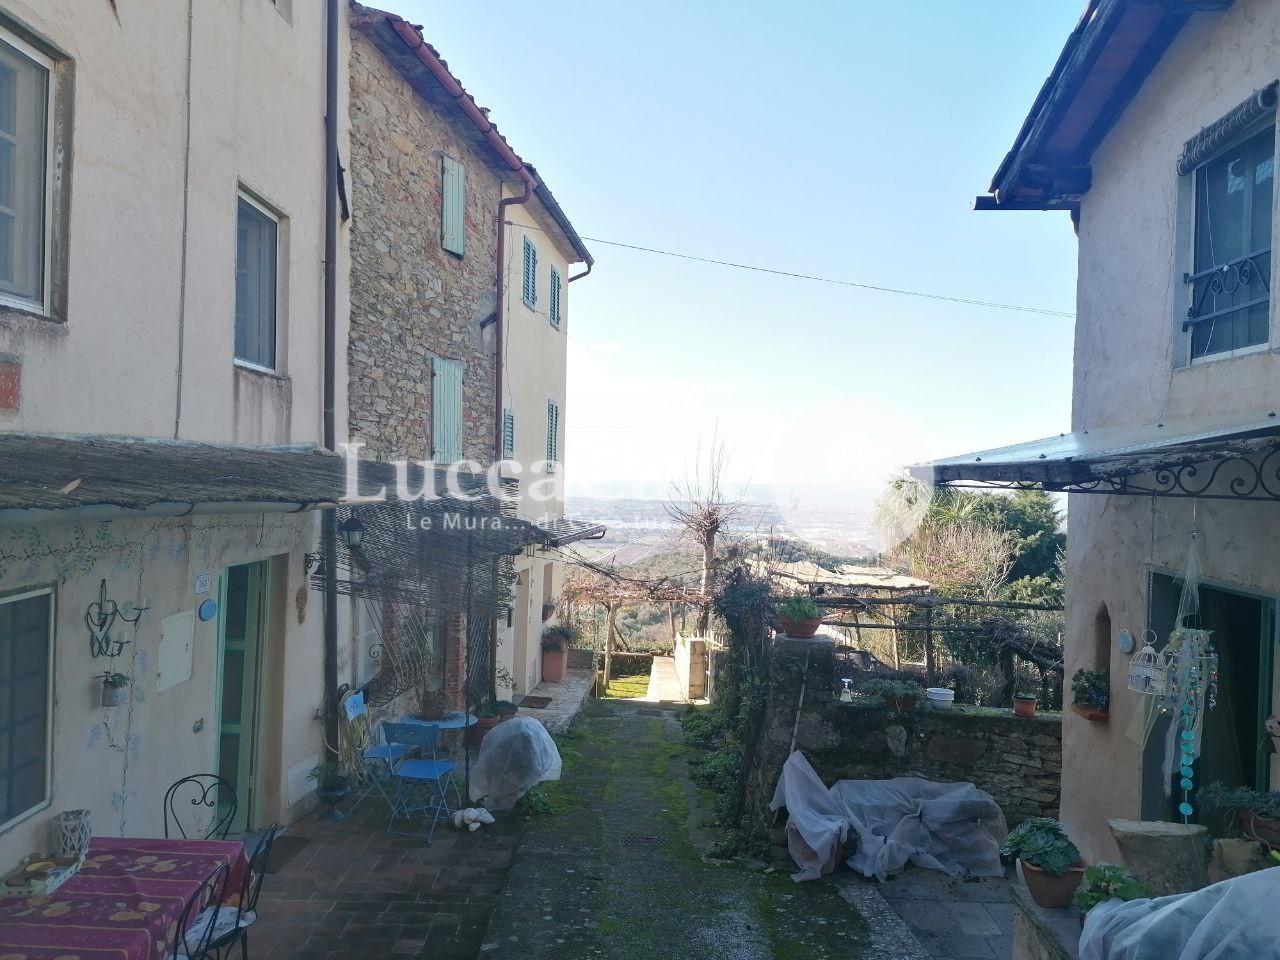 Townhouses for sale in Massarosa (LU)